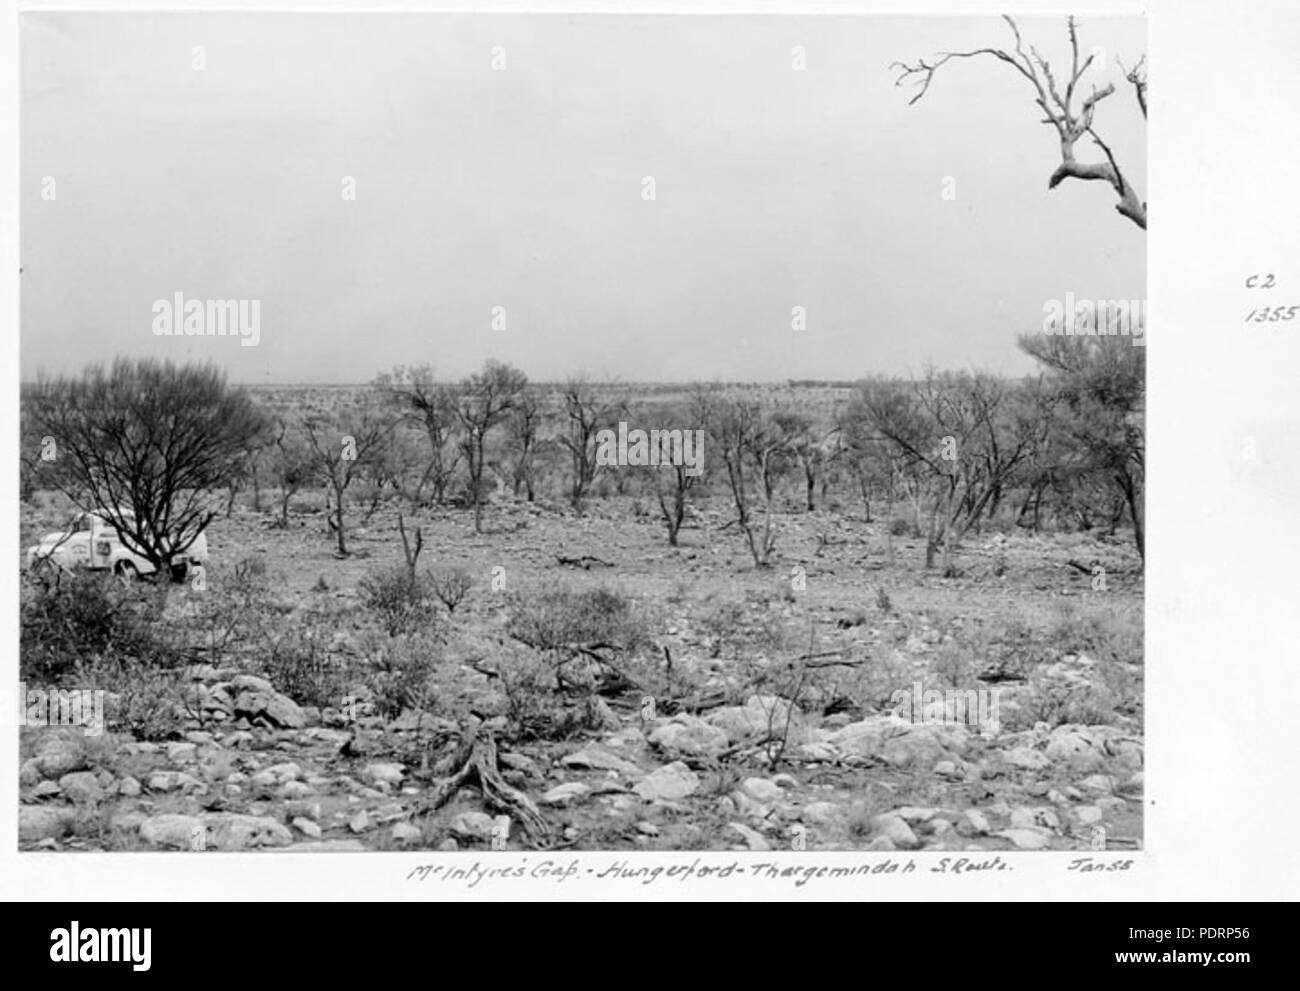 119 Queensland State Archive 5277 mcintyres Lücke Hungerford zu Thargomindah S Route Januar 1955 Stockfoto